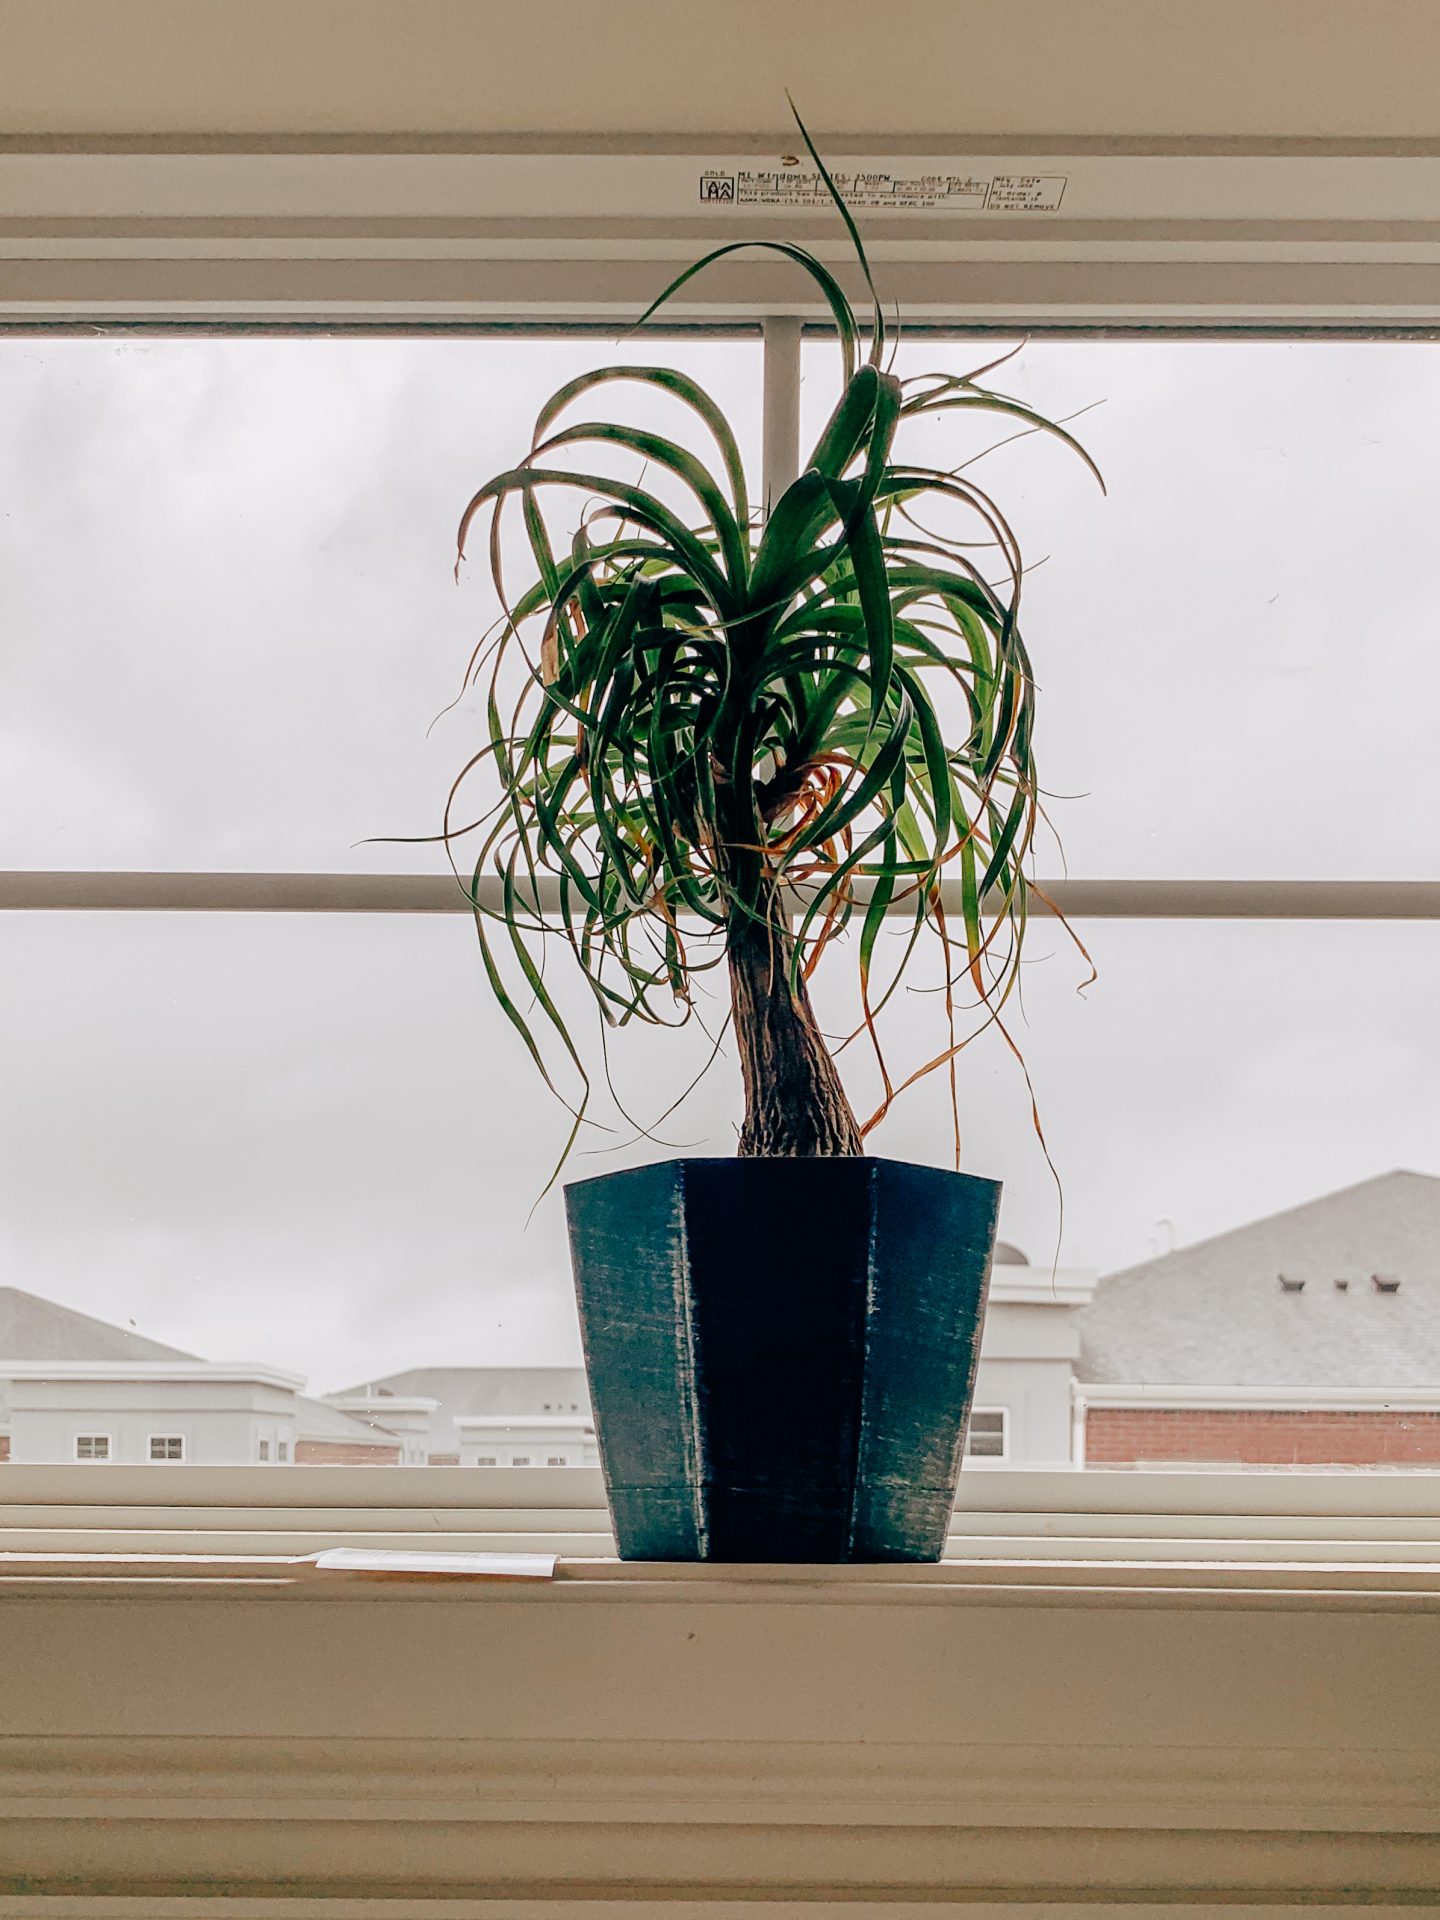 Ponytail Palm Plant from Amazon | Best House Plants from Amazon | Kat Viana